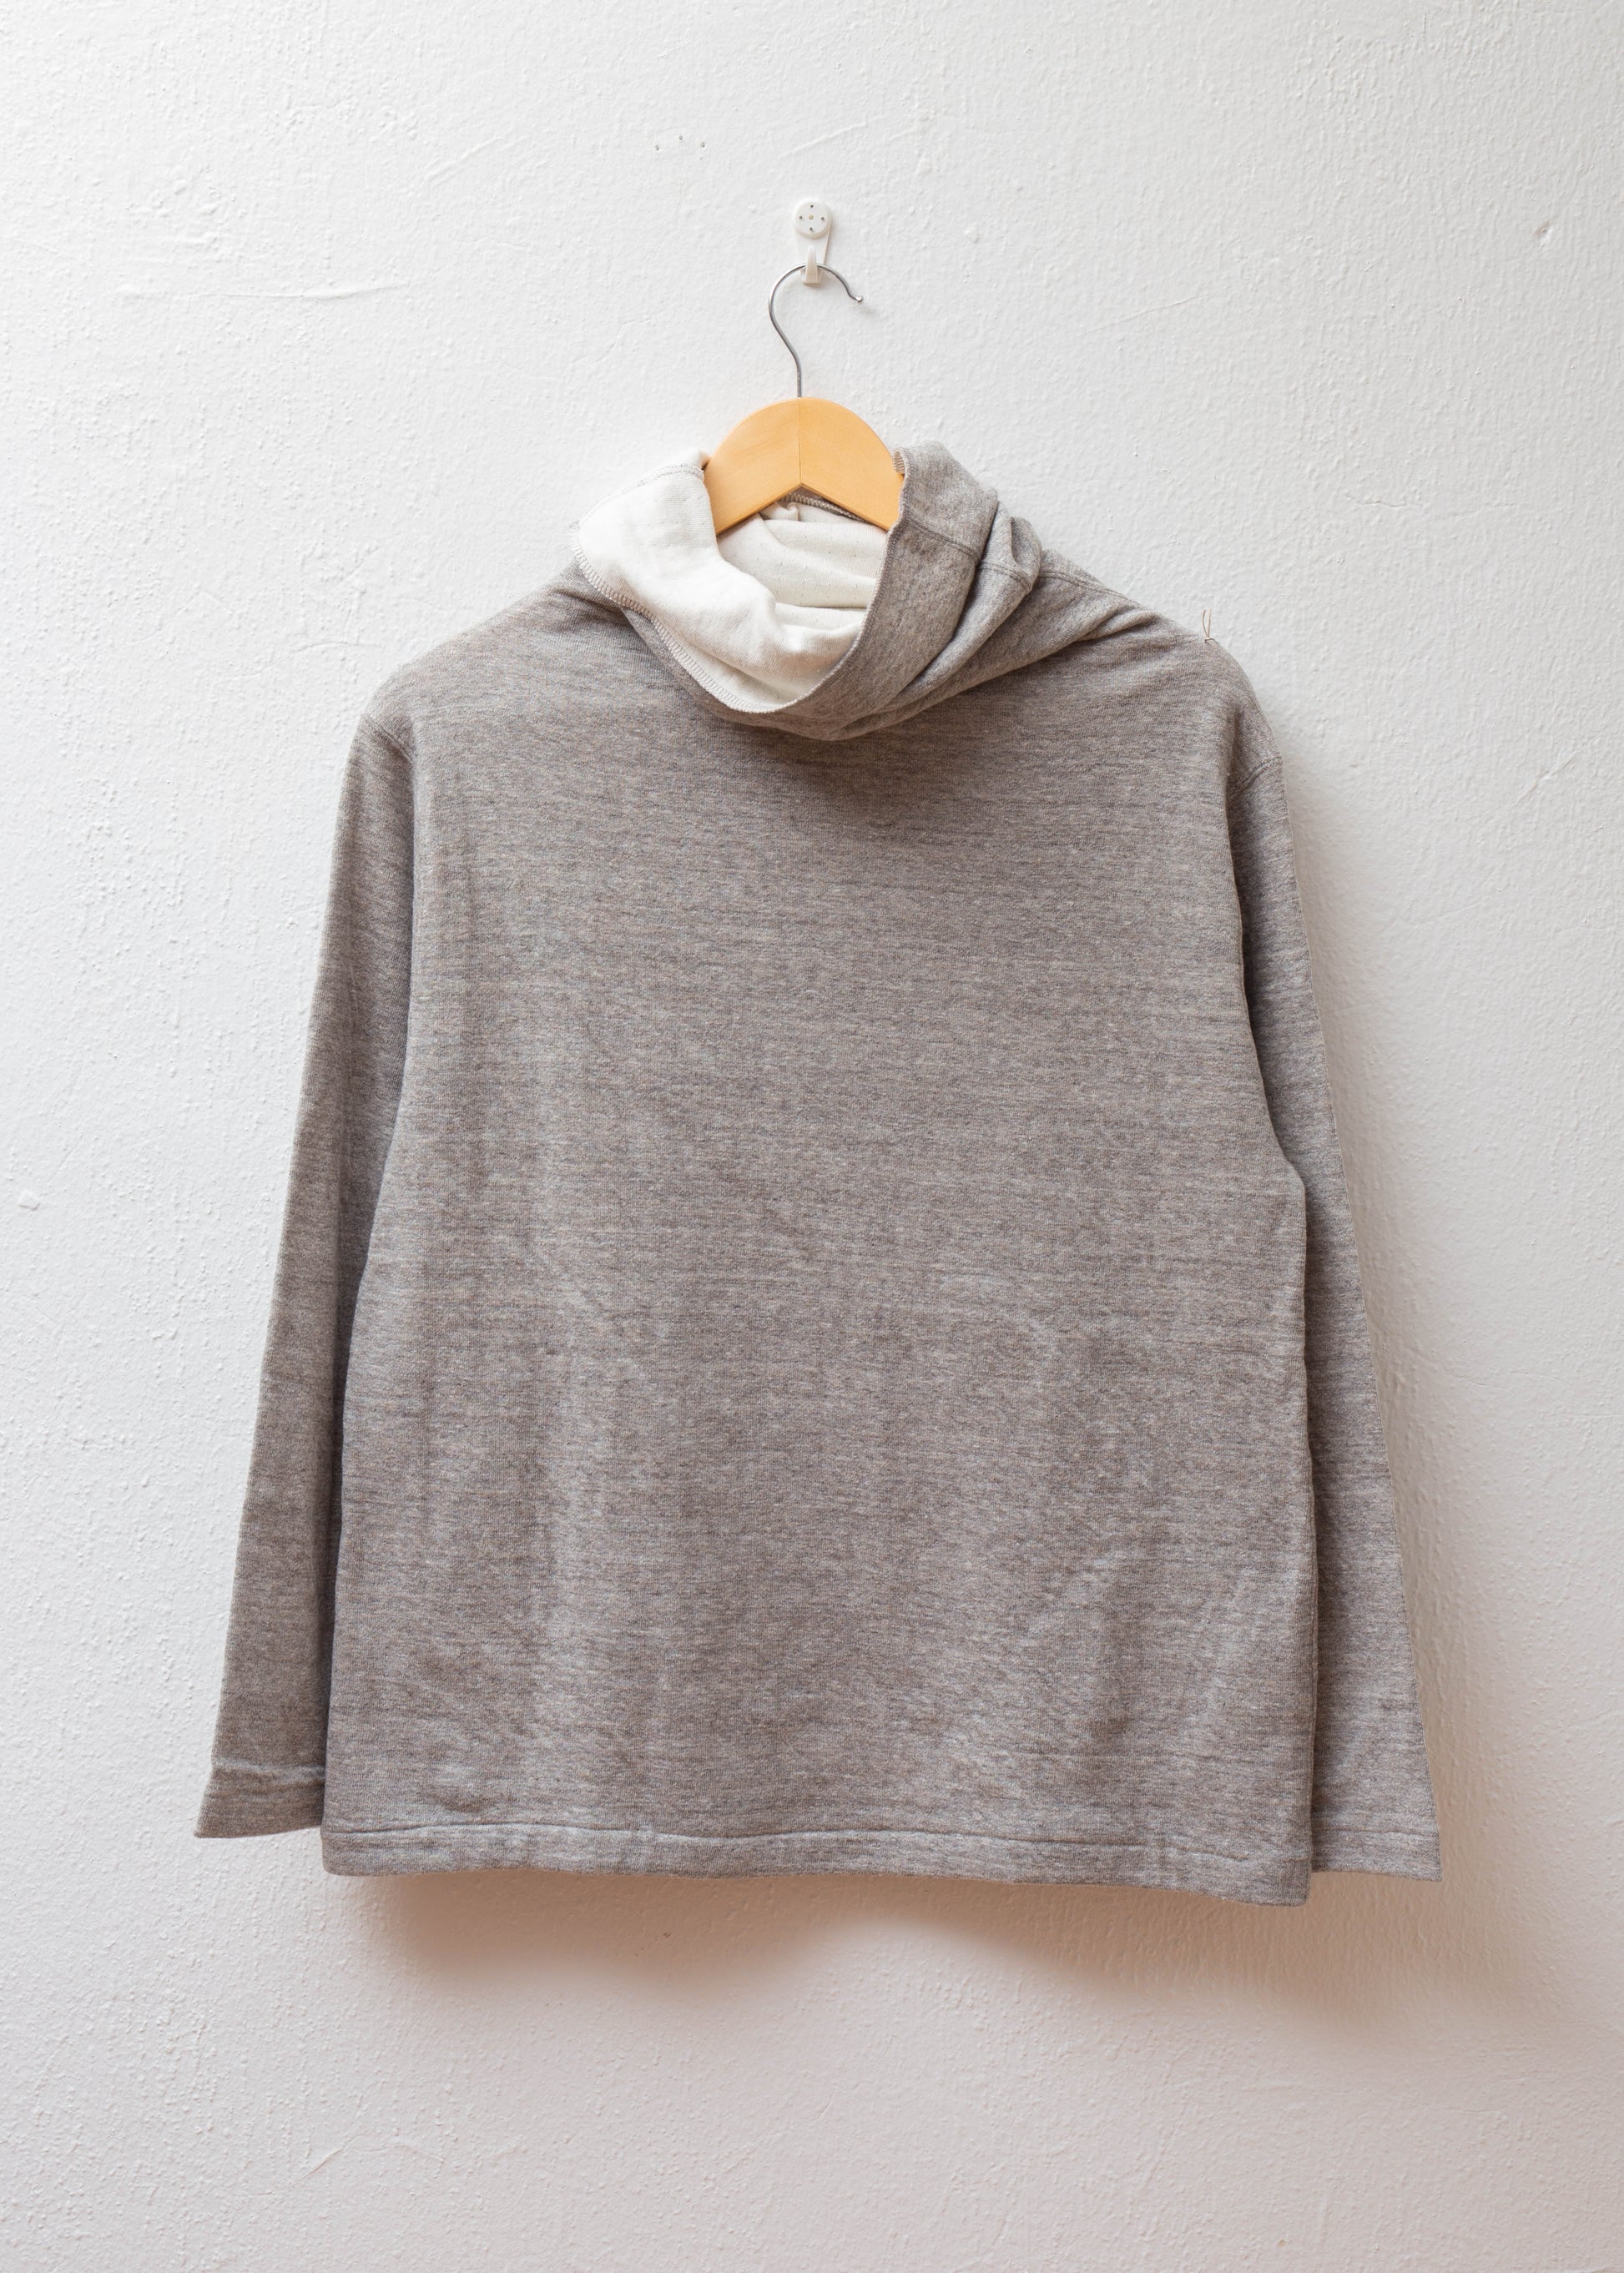 Turtleneck Pullover in color gray hanging on white wall